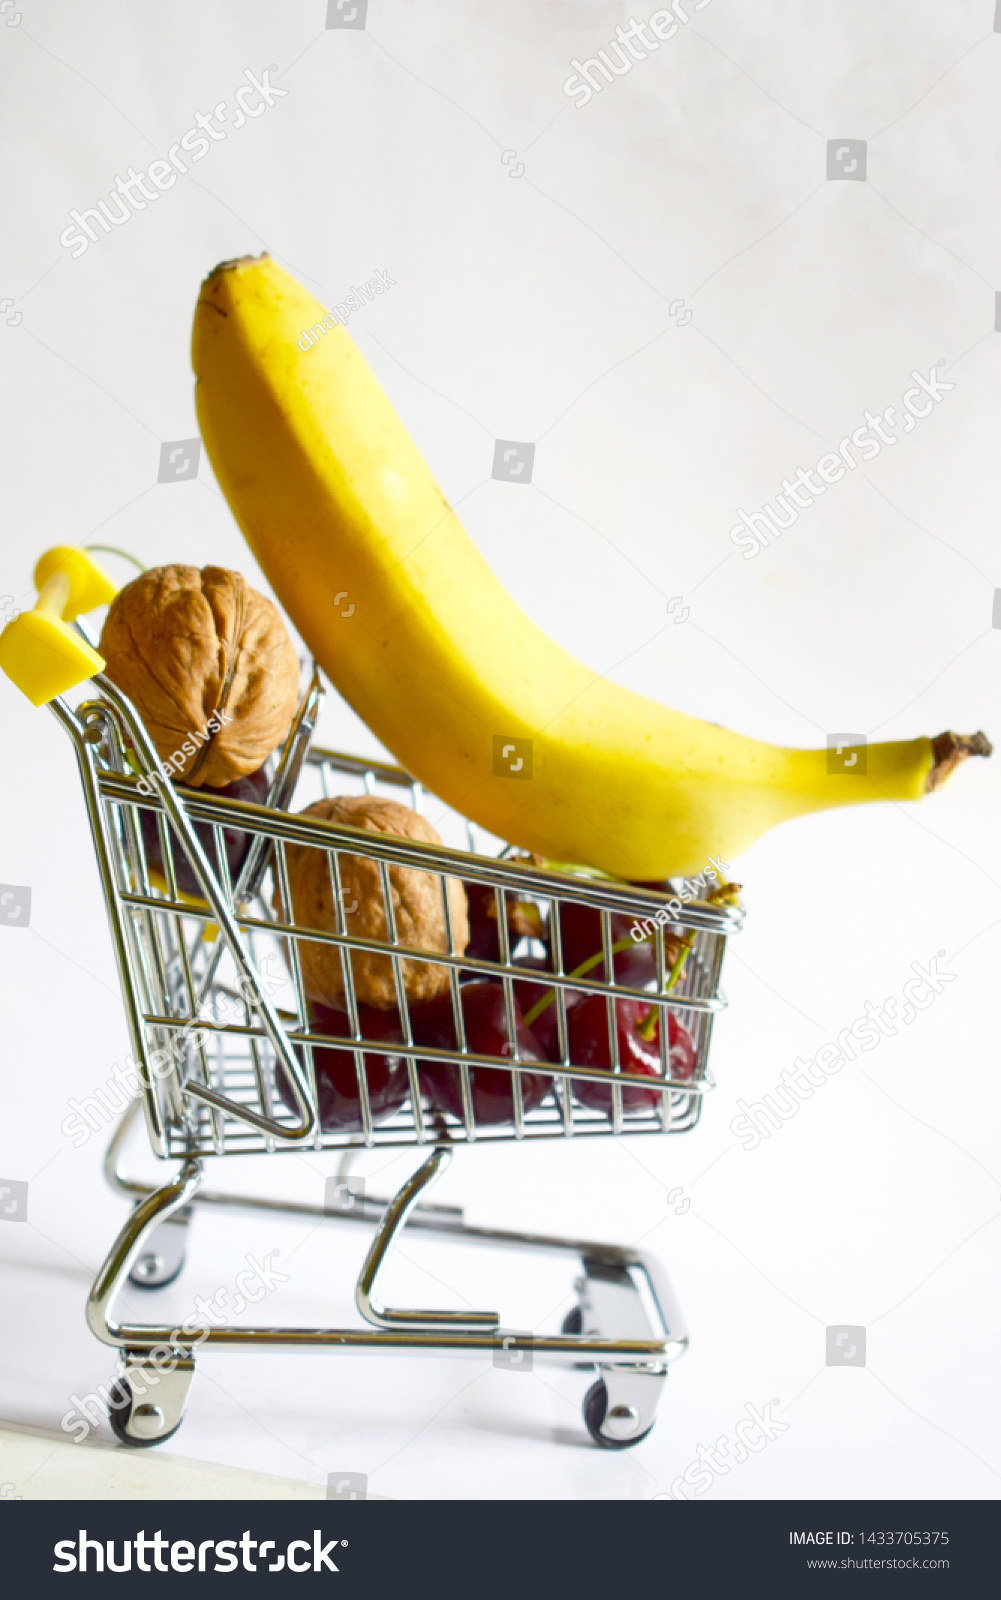  shopping cart with nuts and banana #1433705375